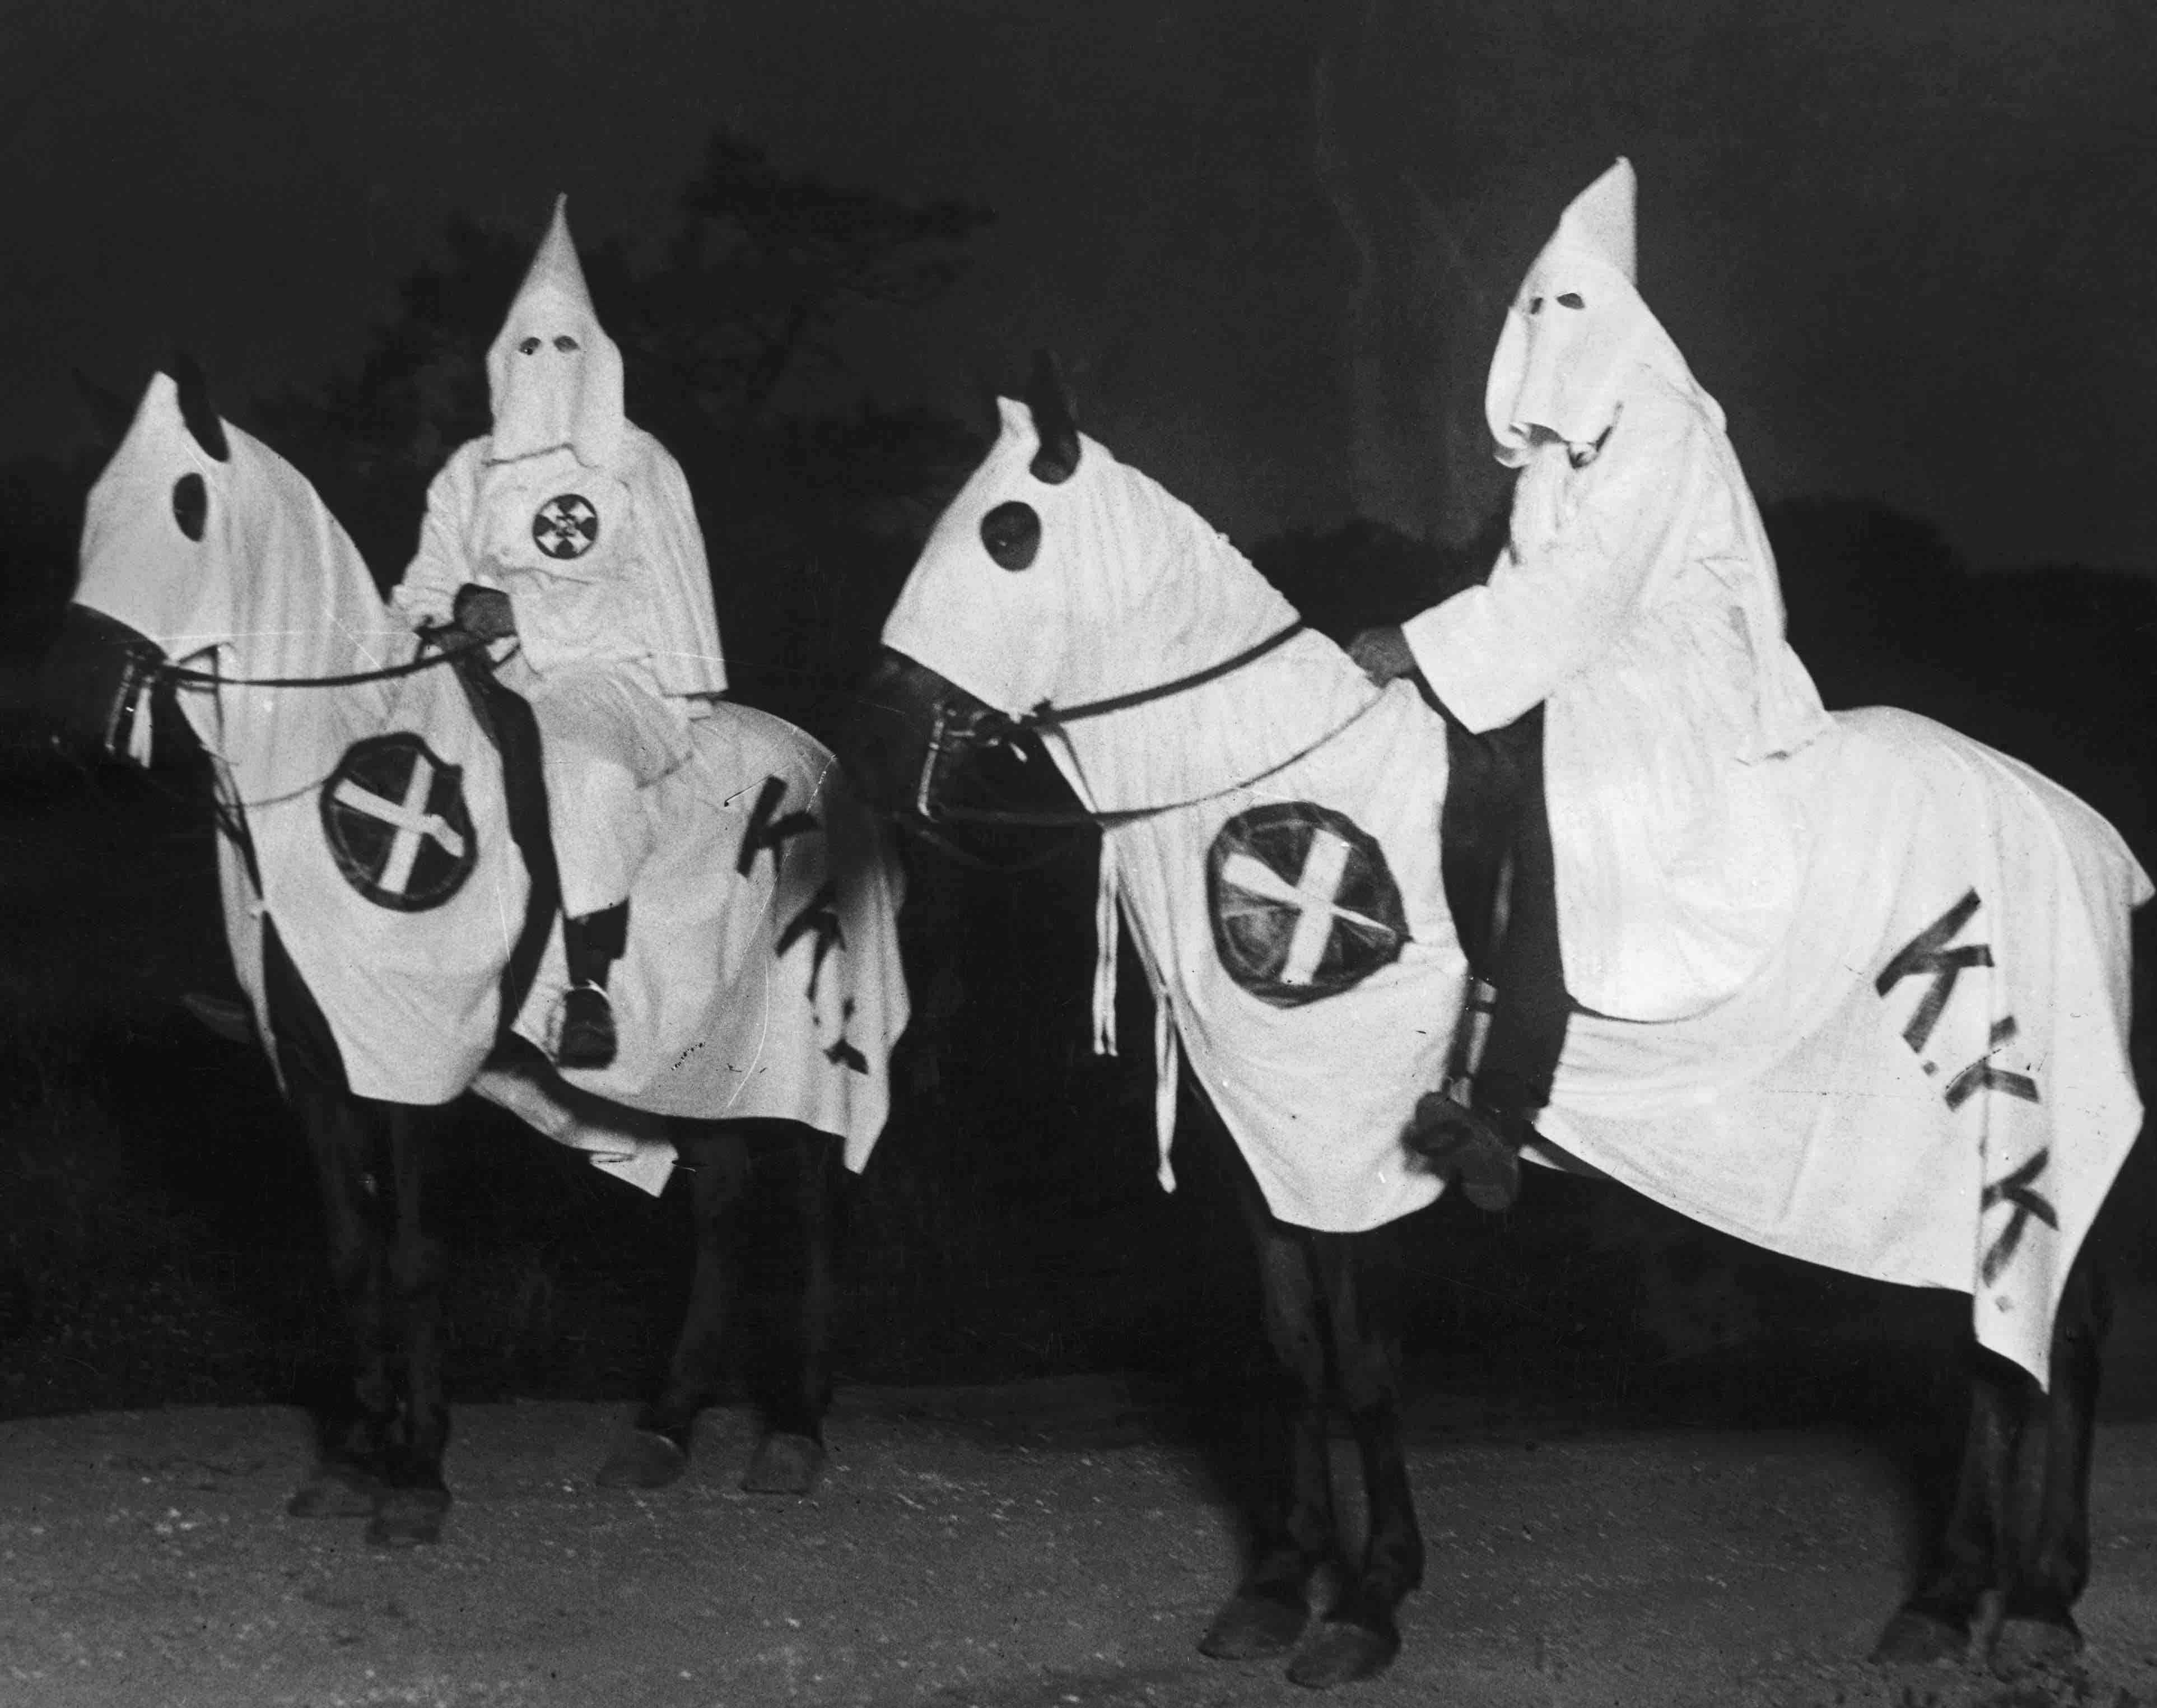 Two Klansmen from the 1920s, with the Crusader
Cross on both their horses' livery and on their Klan robes